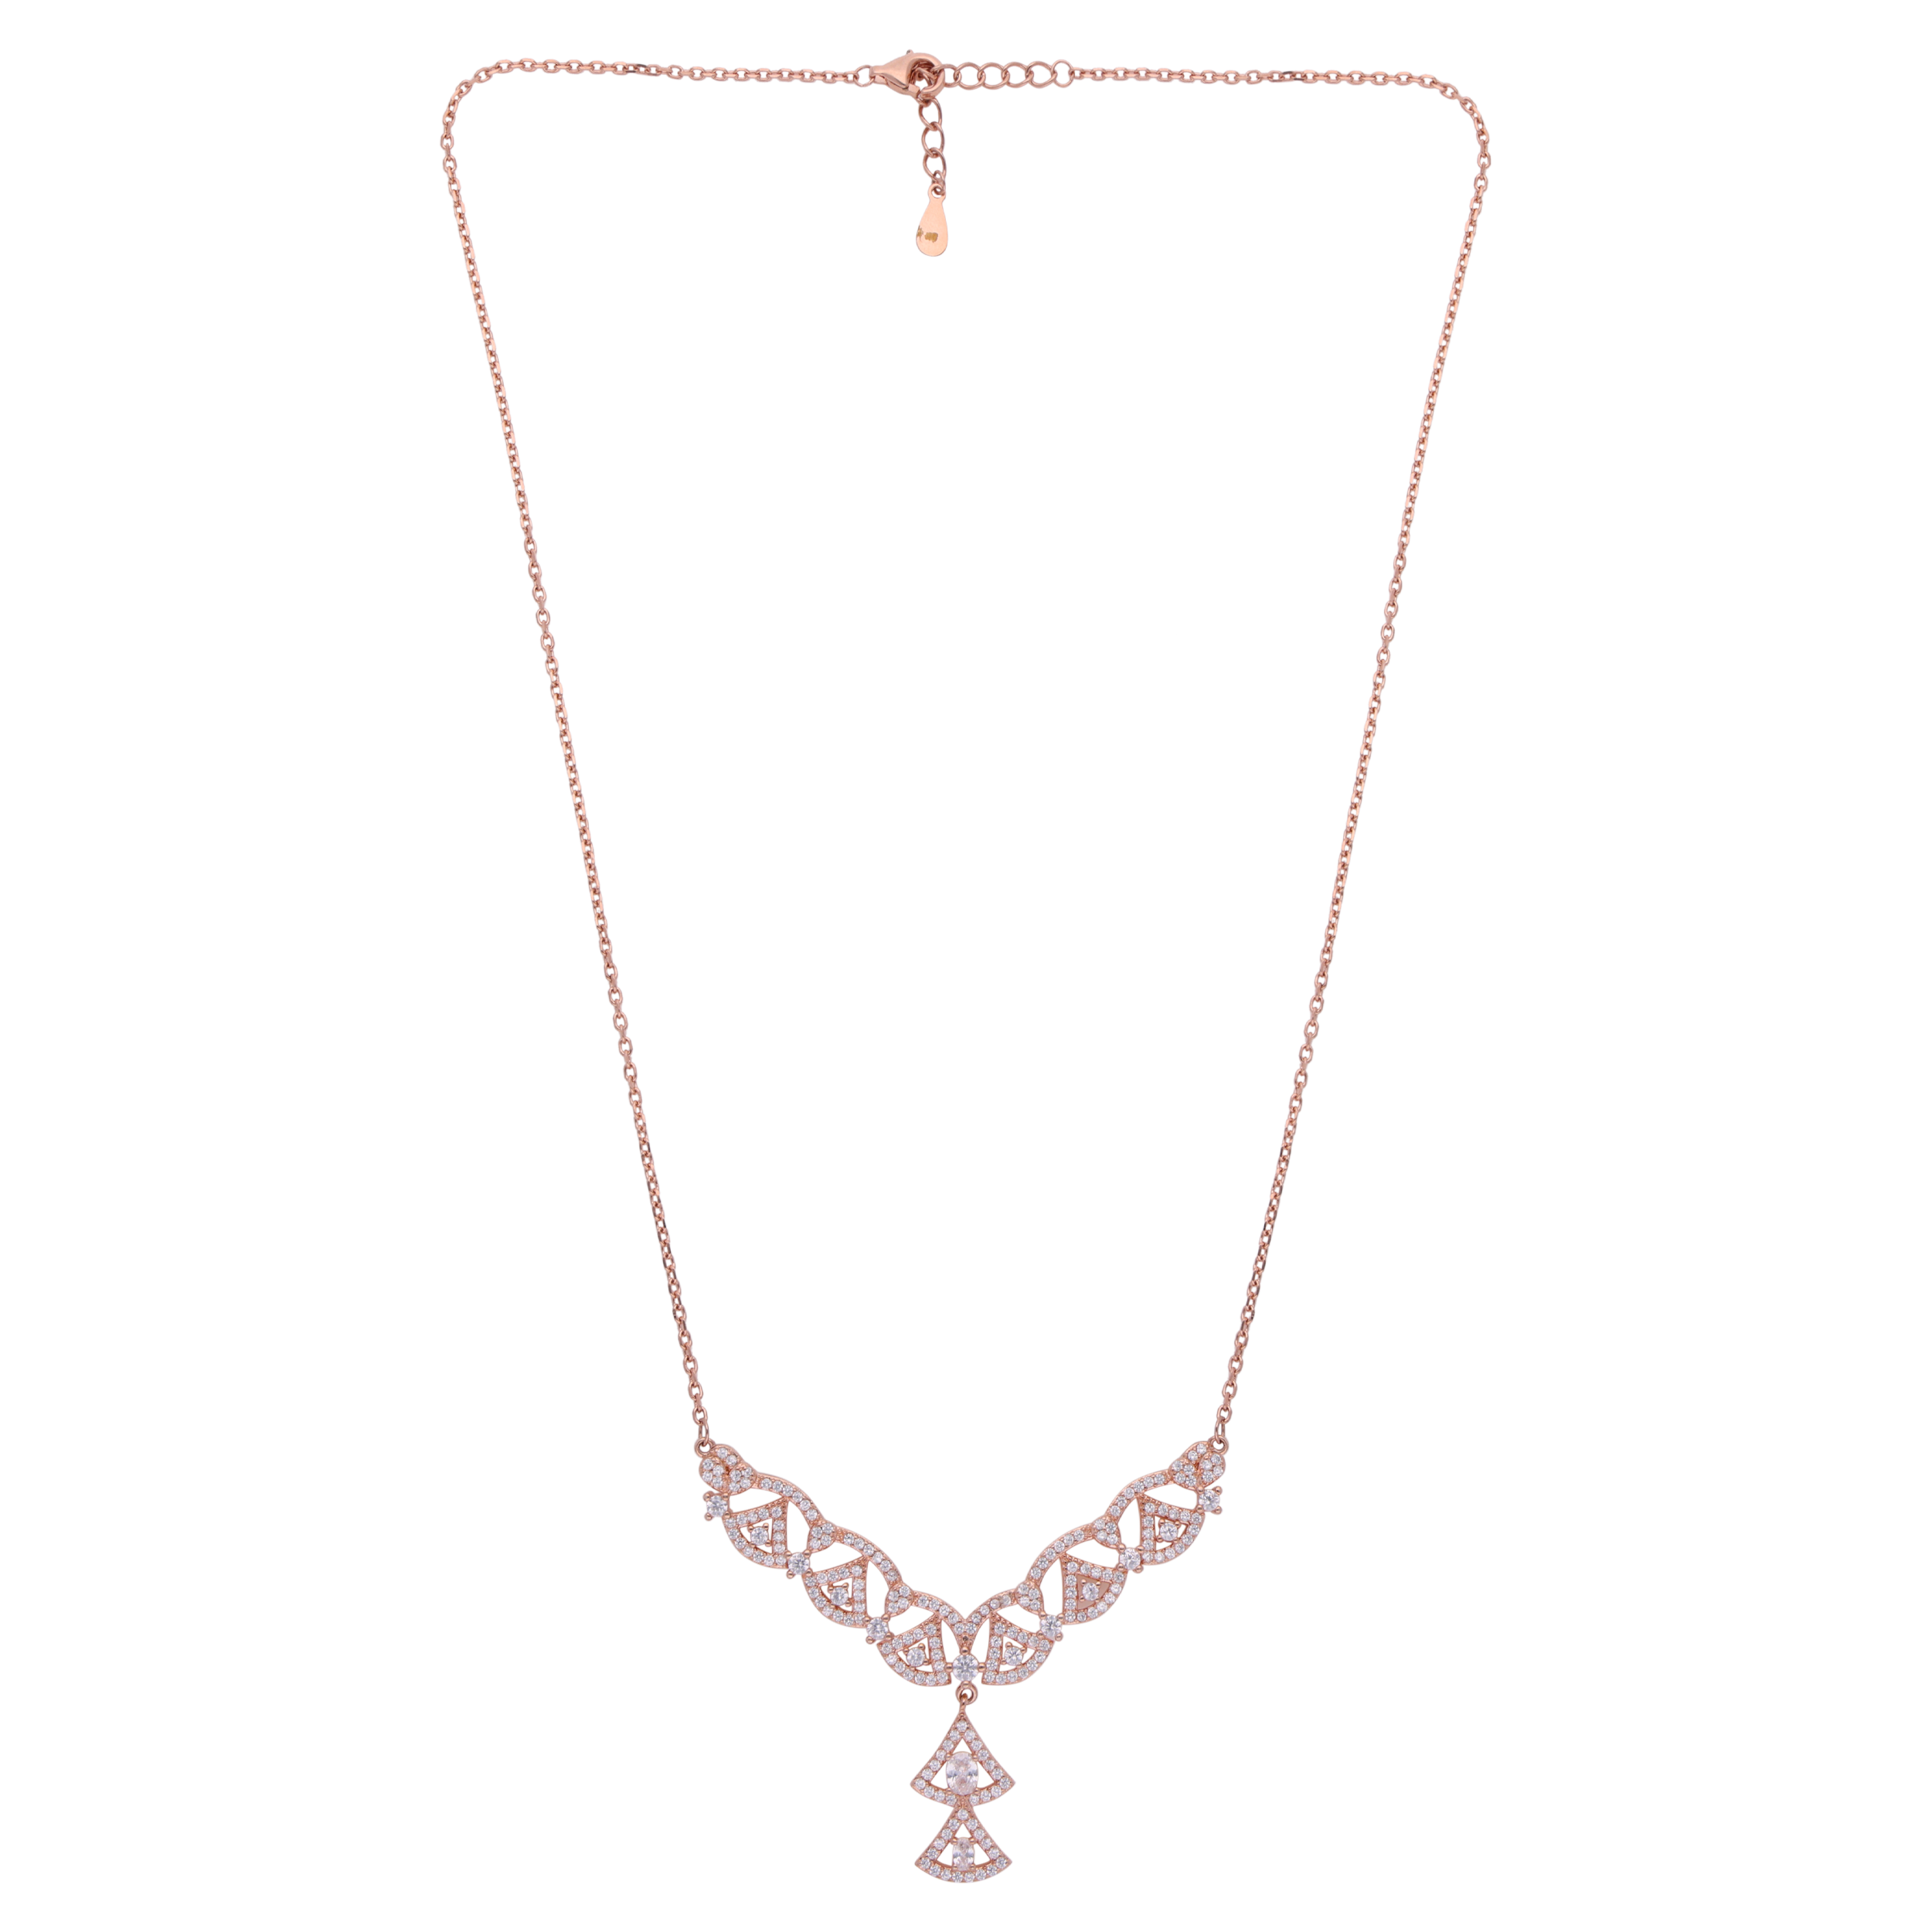 Radiant Rose: Sterling Silver Double Hood Chain Pendant | SKU : 0003113981